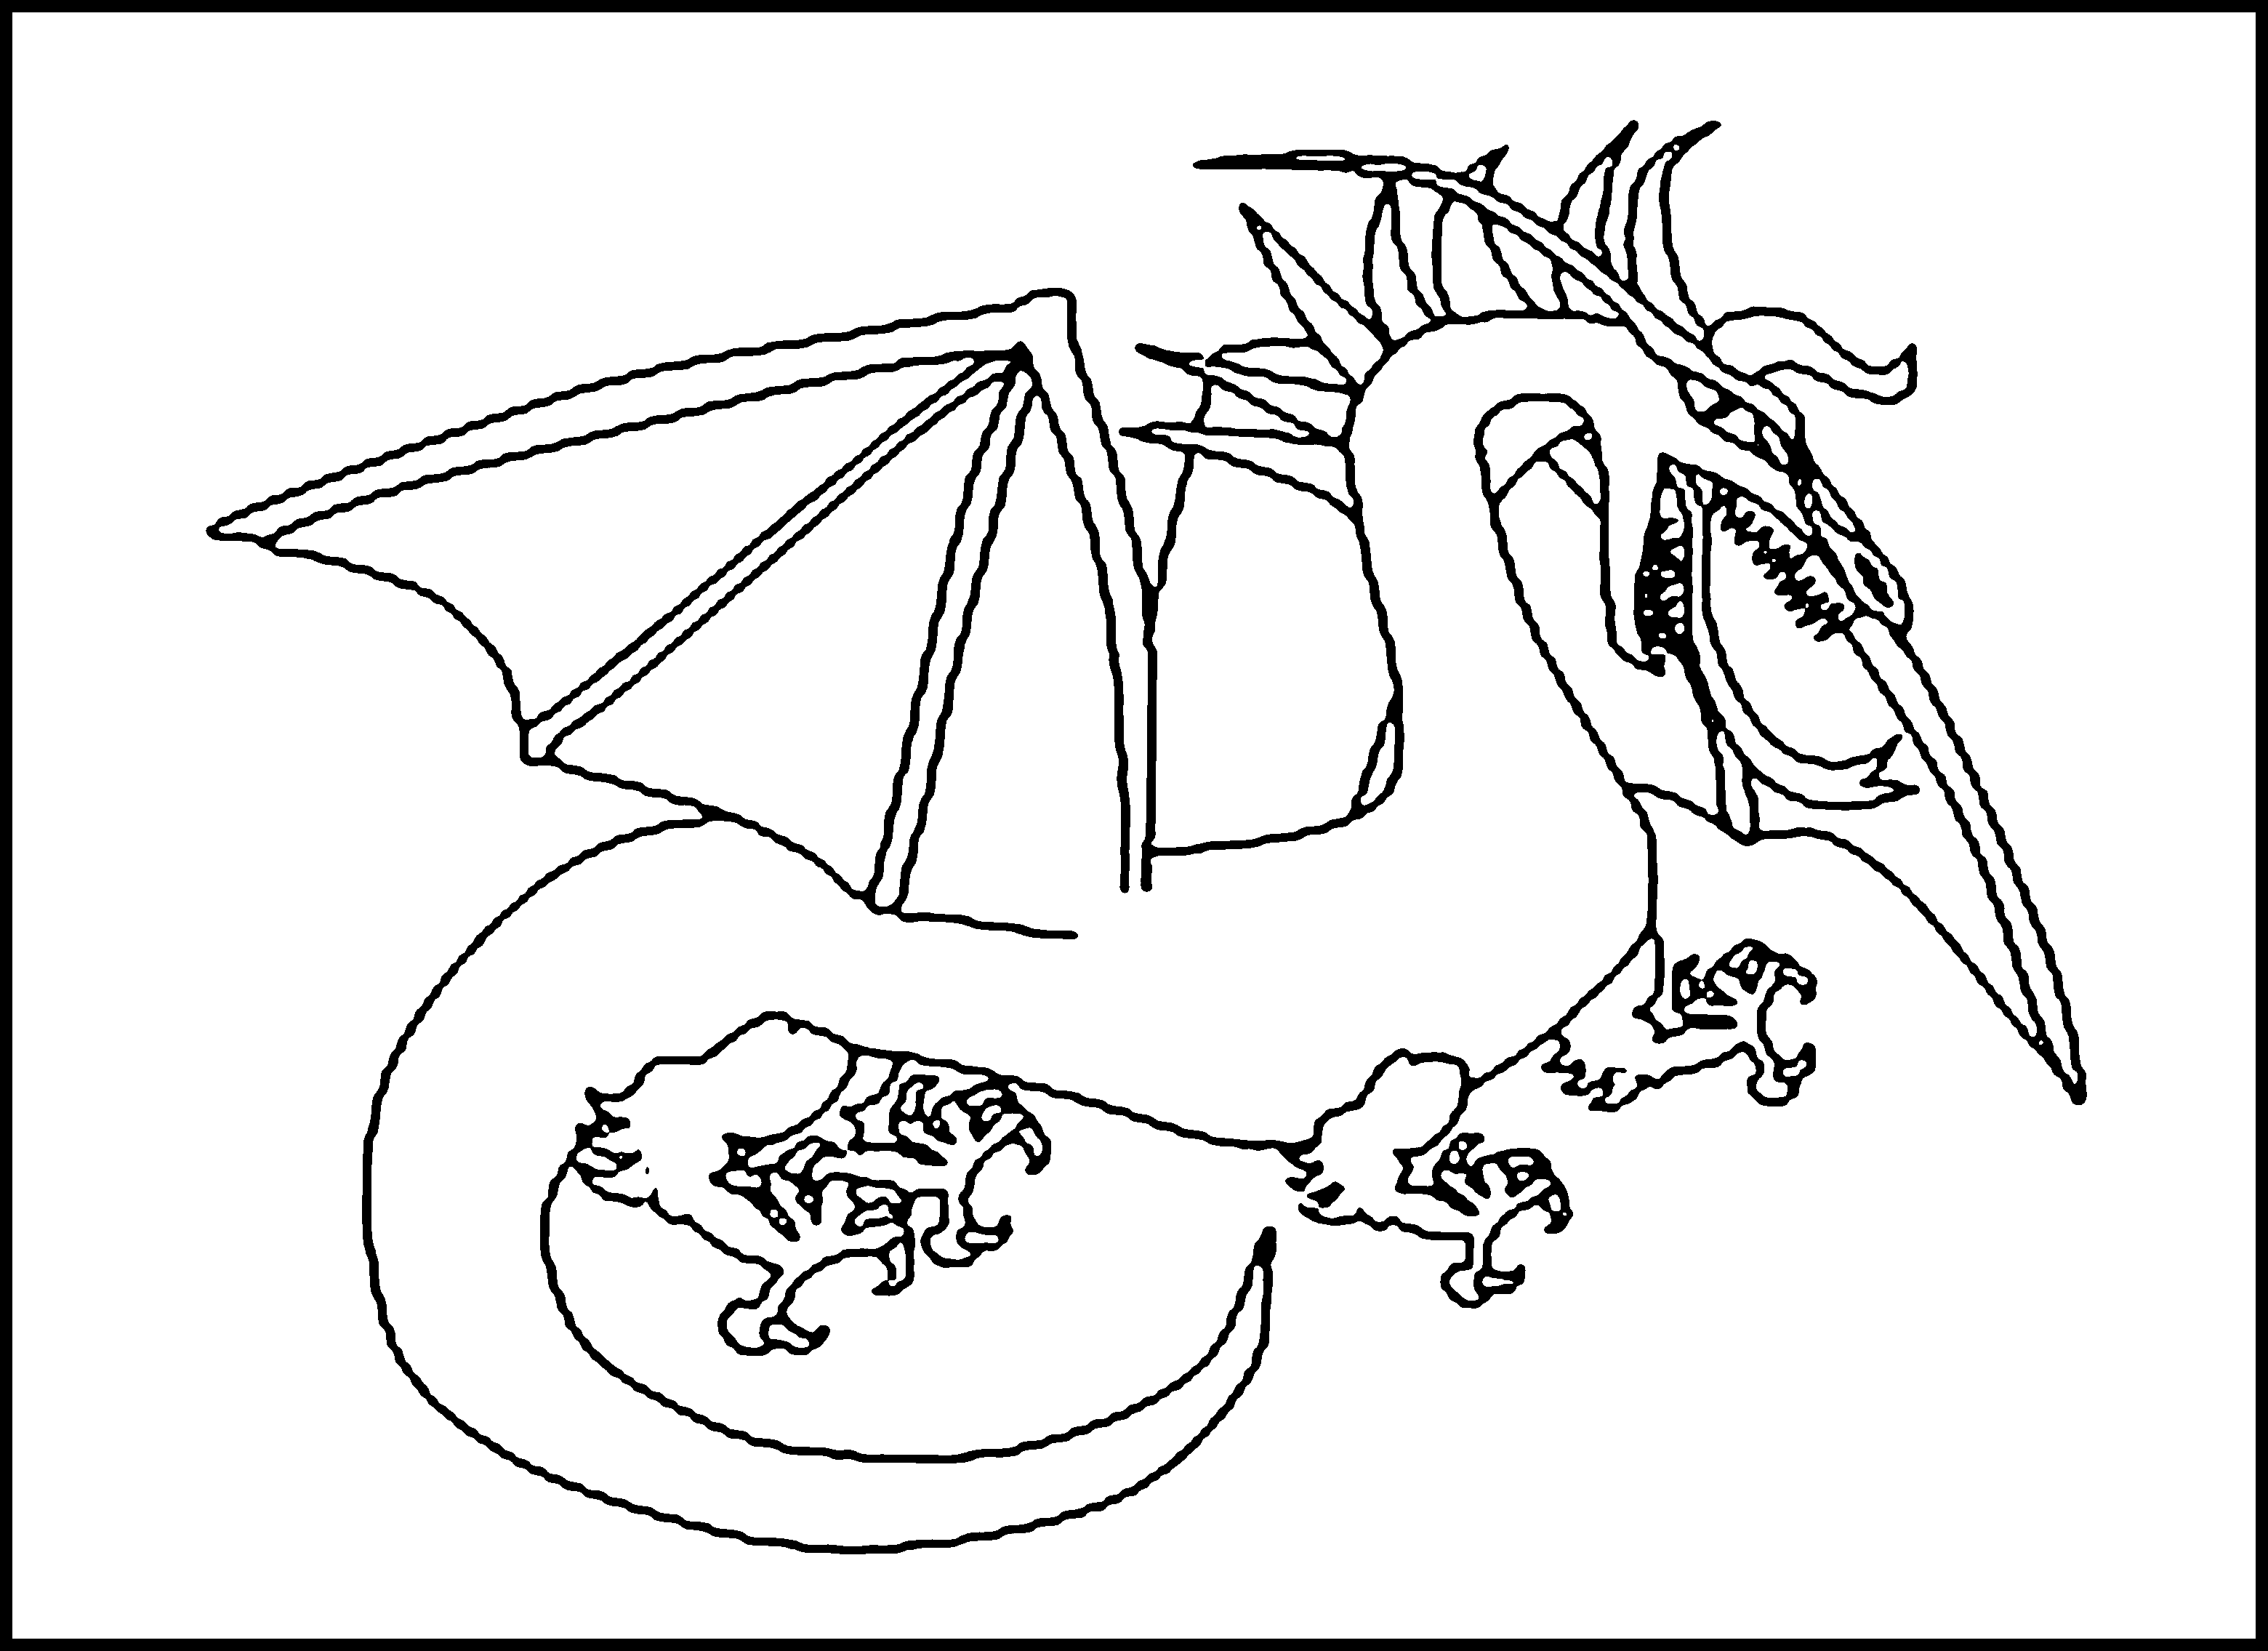 wish dragon coloring pages